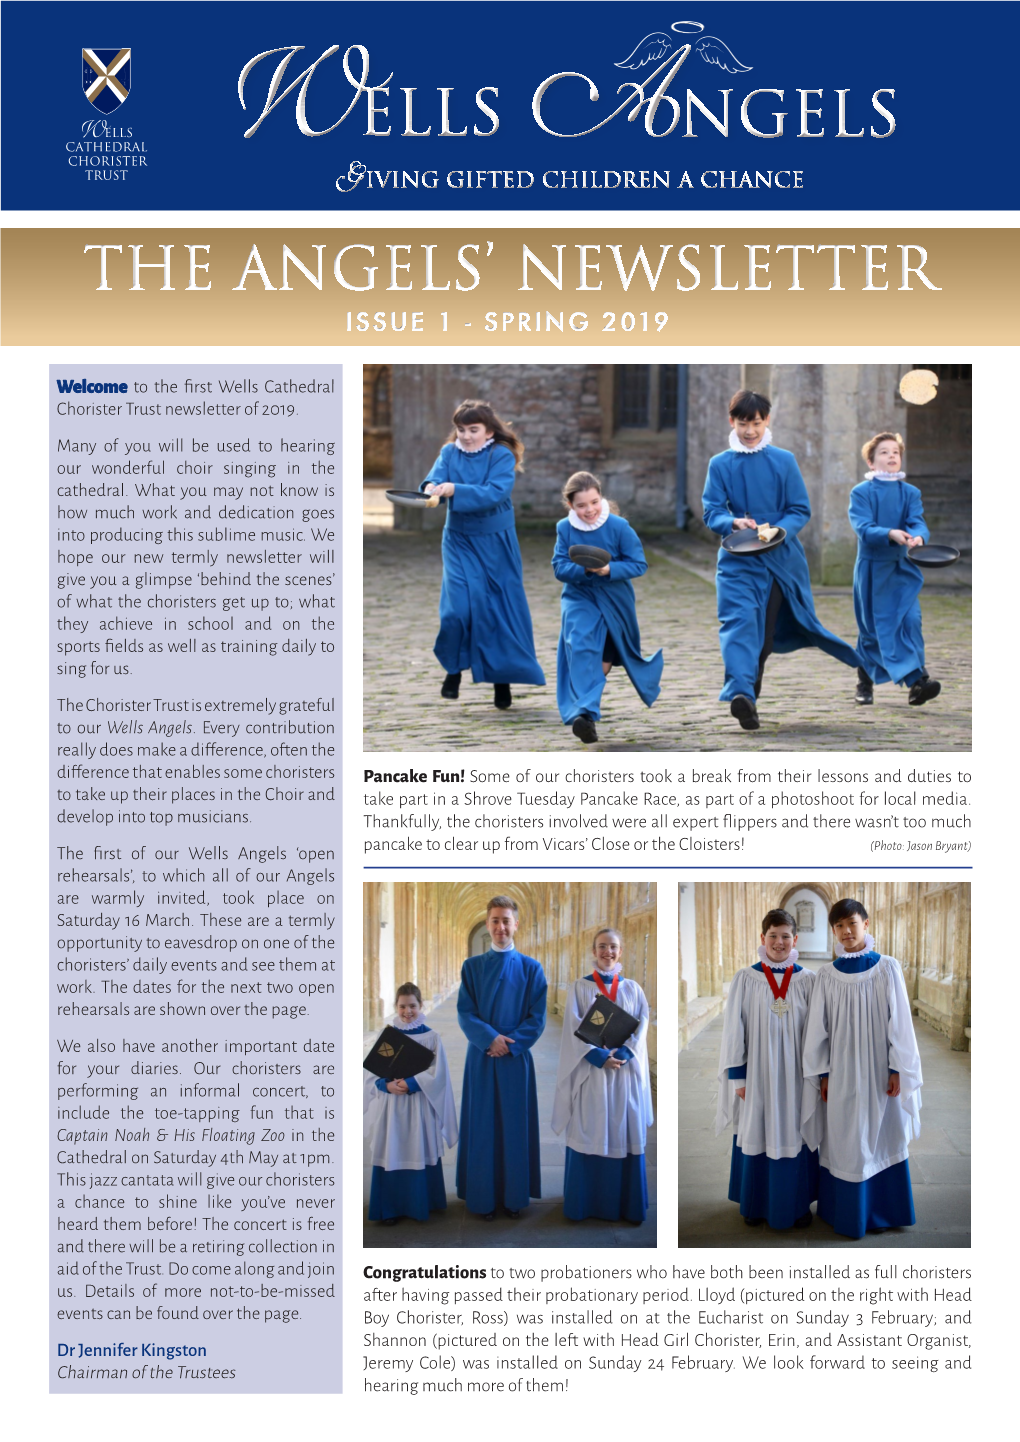 Wells Angels G Iving Gifted Children a Chance the Angels’ Newsletter ISSUE 1 - SPRING 2019